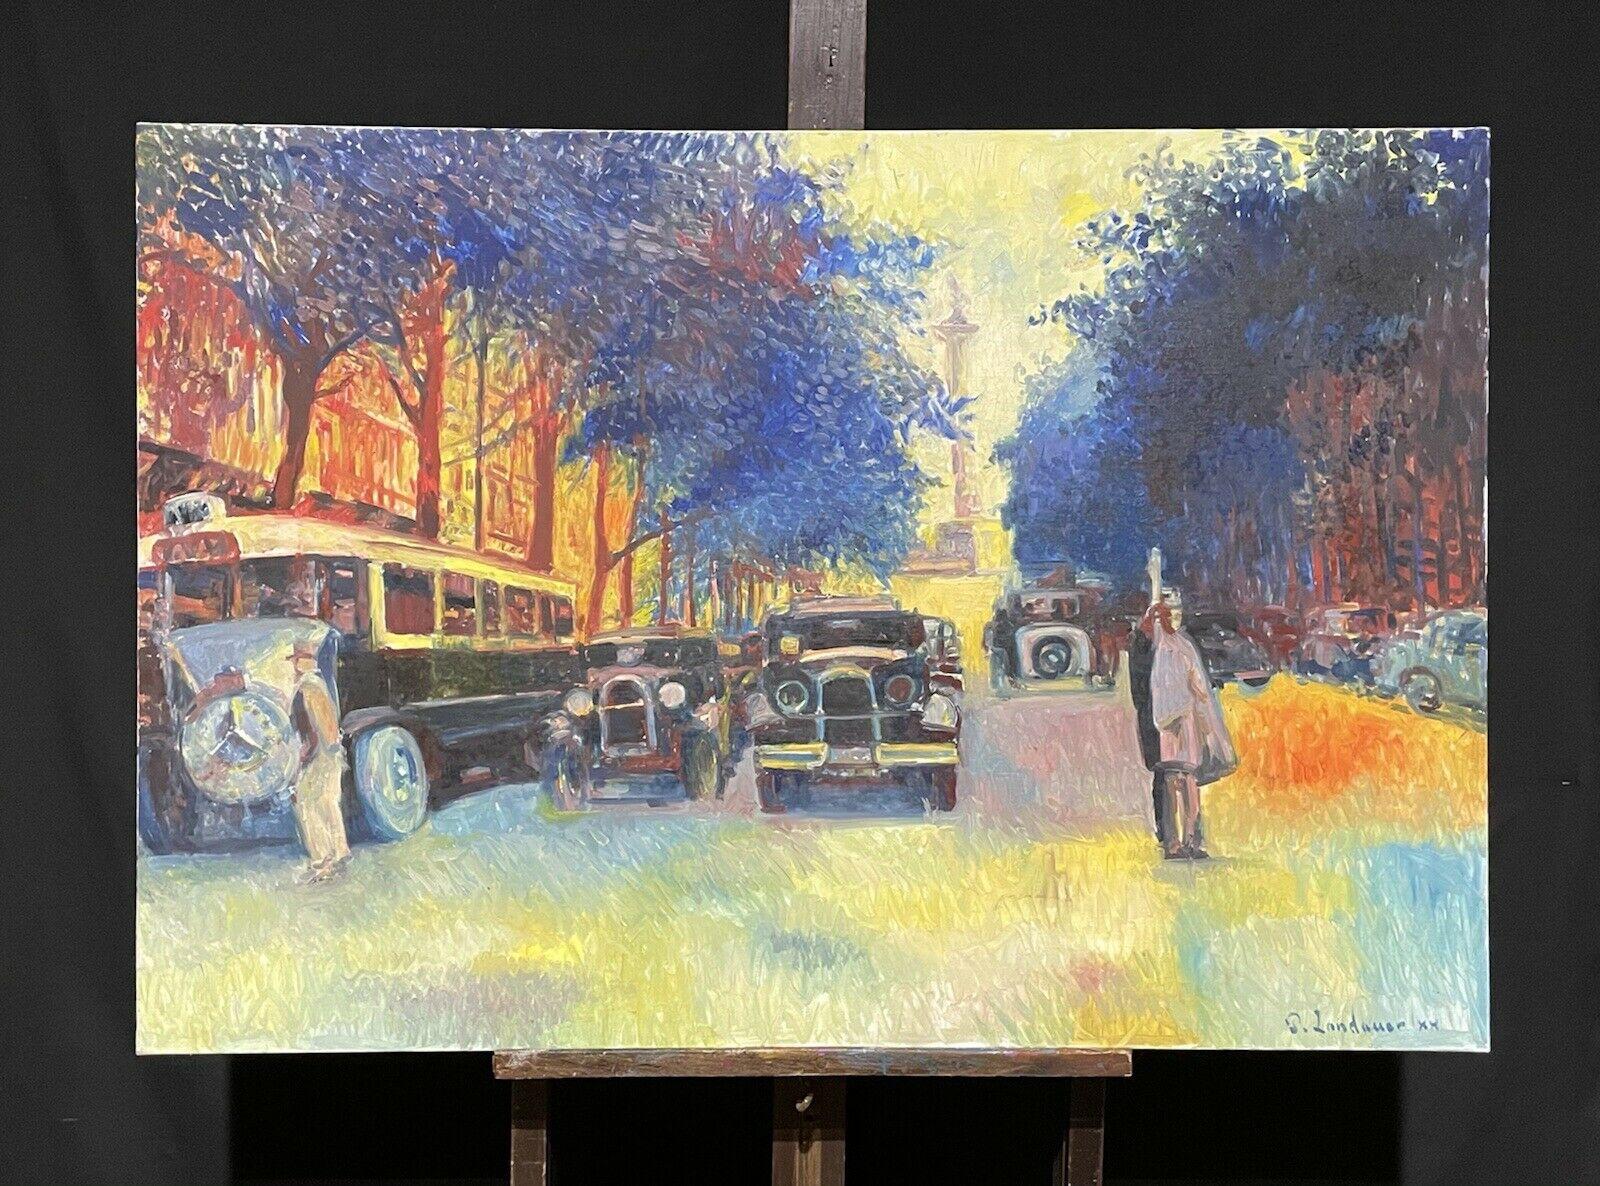 Huge Signed French Impressionist Oil - Busy Parisian Street Vintage Scene - Brown Figurative Painting by Patrice Landauer